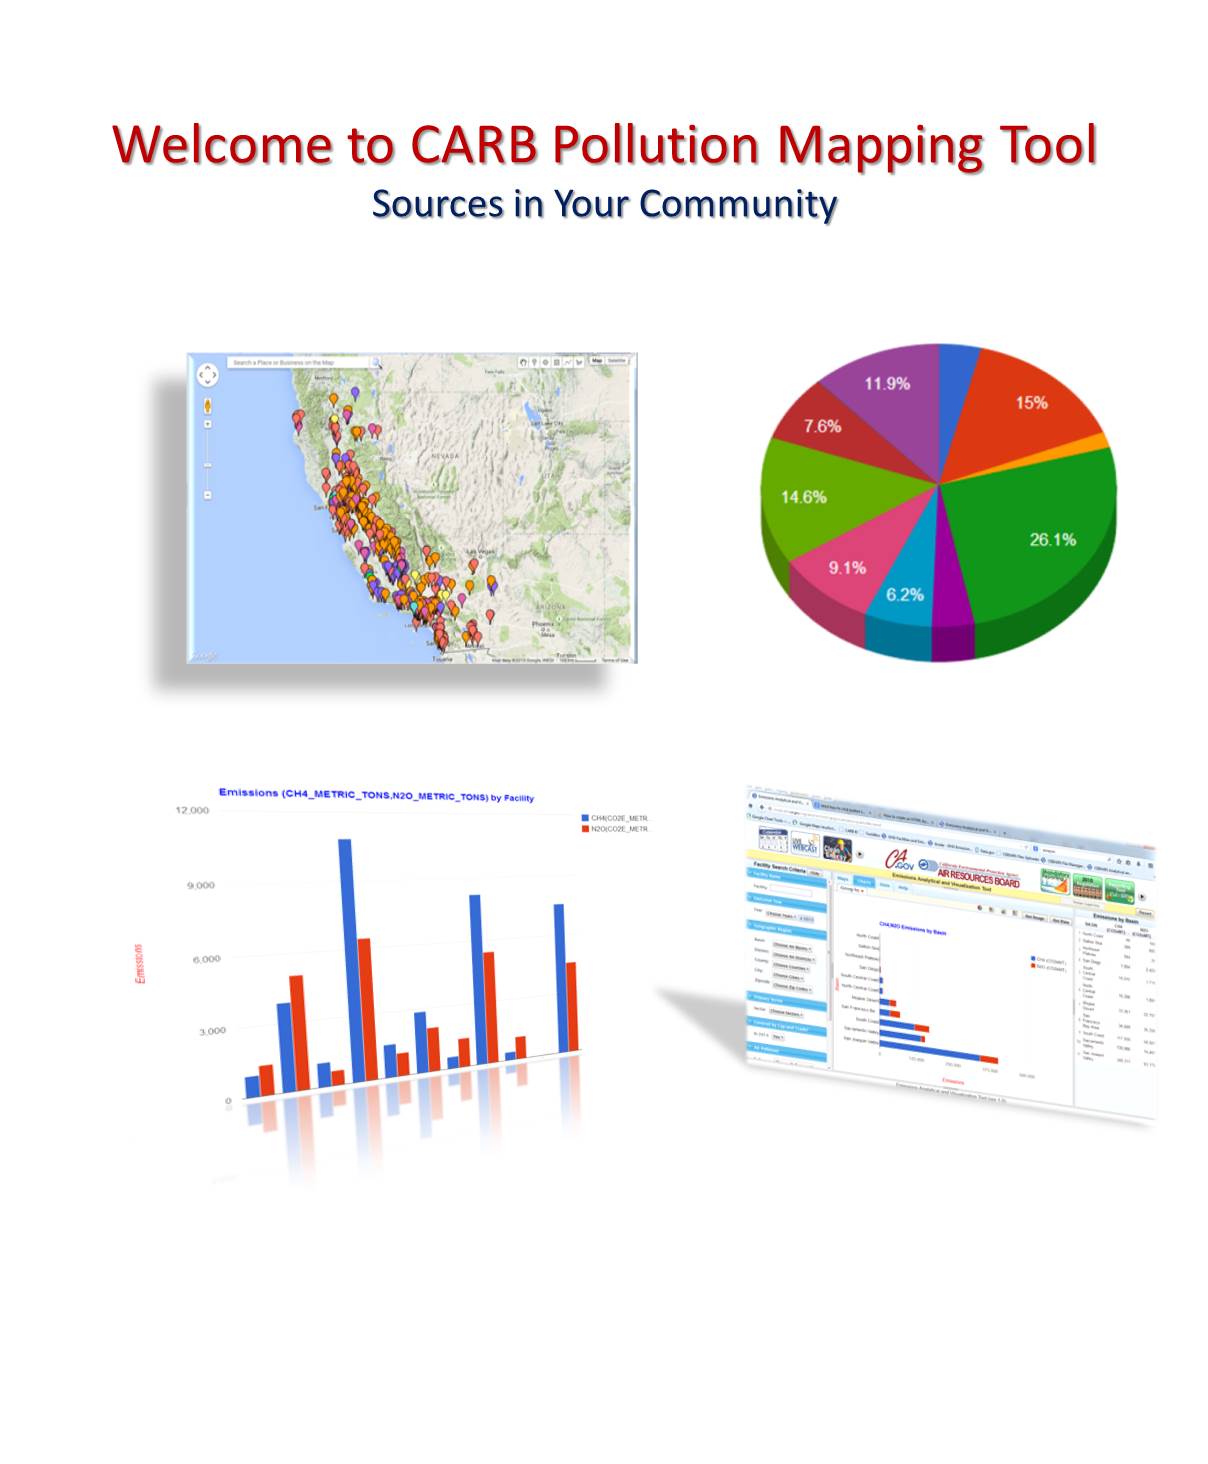 Welcome to the CARB Pollution Mapping Tool